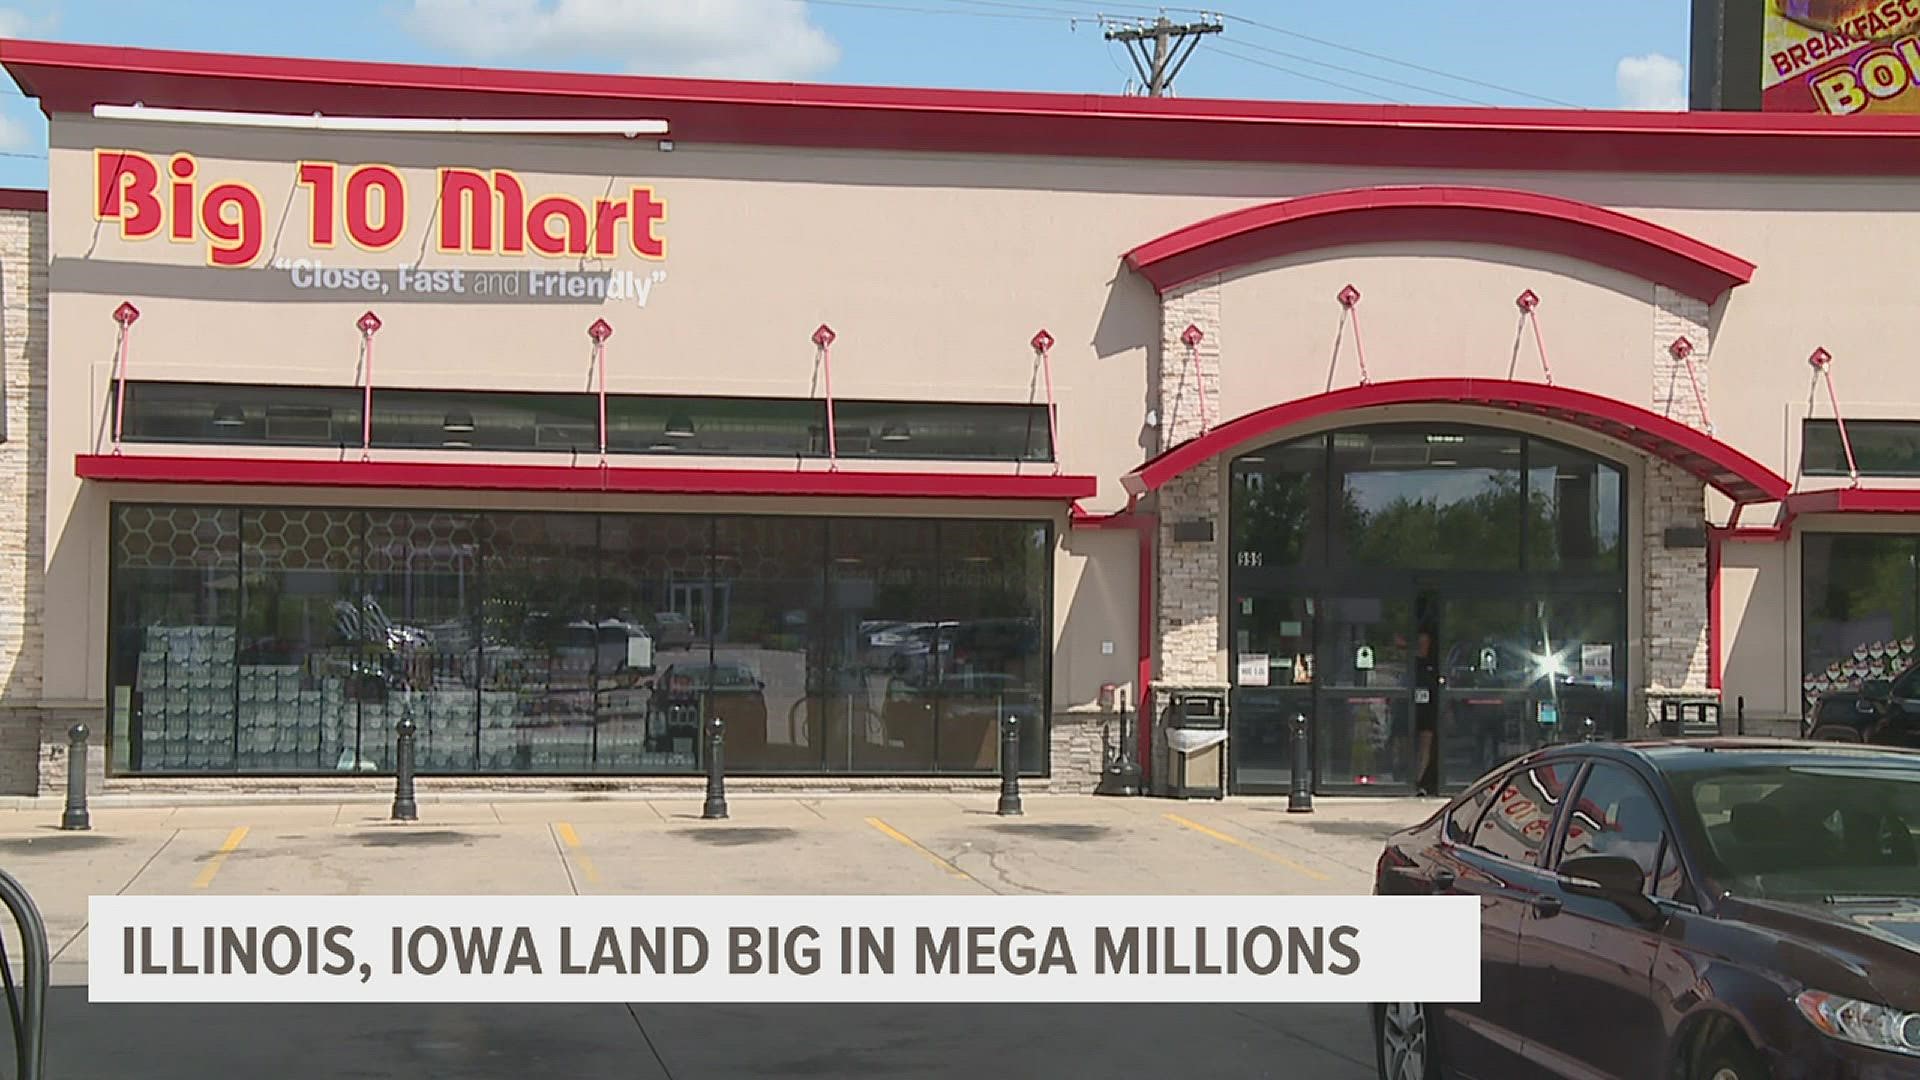 Check your numbers! The $2 million winning ticket was purchased at Big 10 Mart on Middle Road.